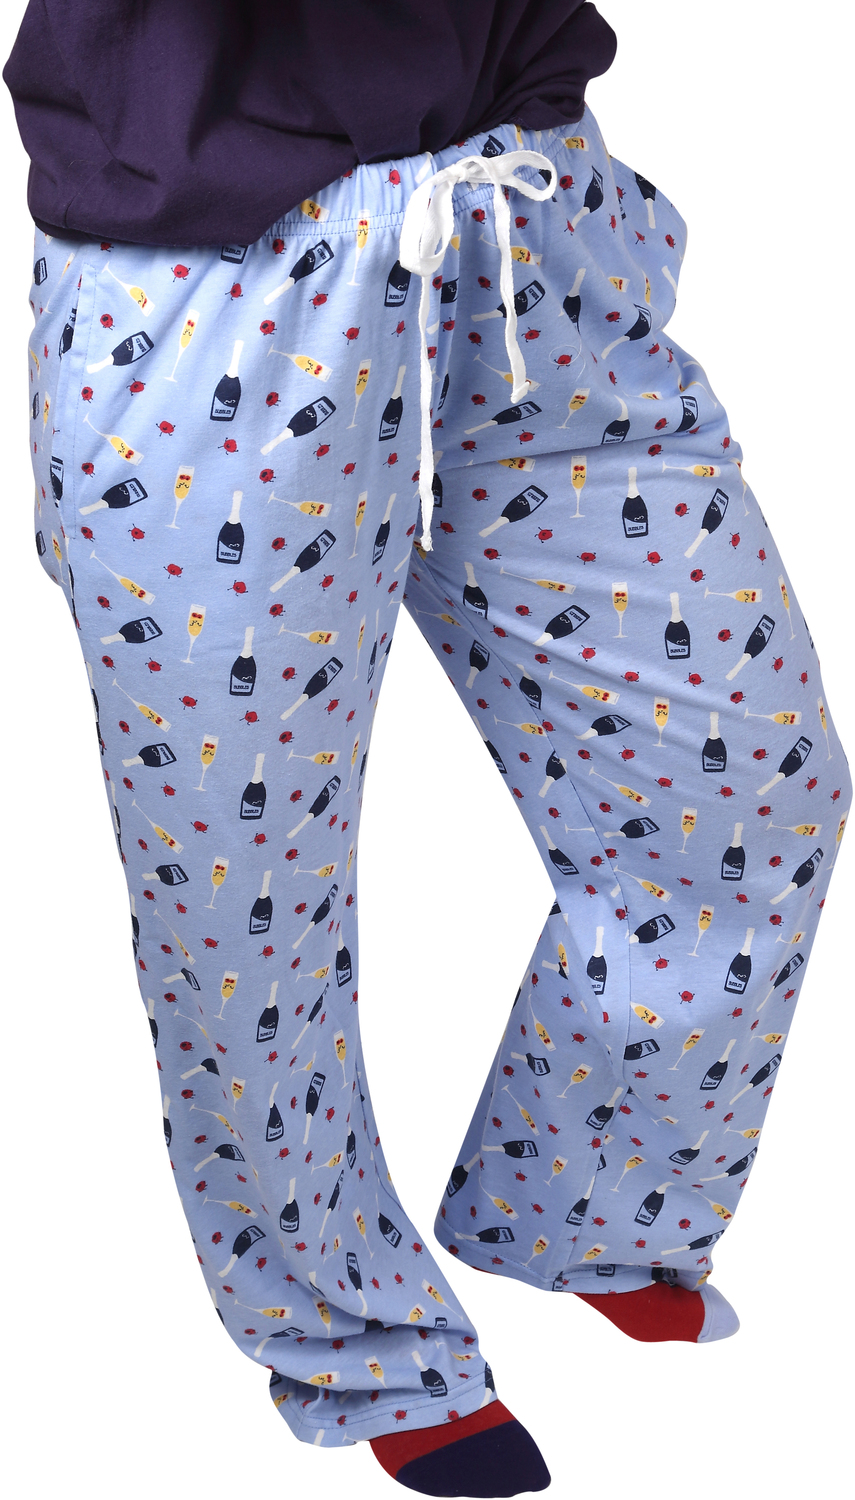 Prosecco & Raspberries
 by Late Night Last Call - Prosecco & Raspberries
 - XS Light Blue Unisex Lounge Pants